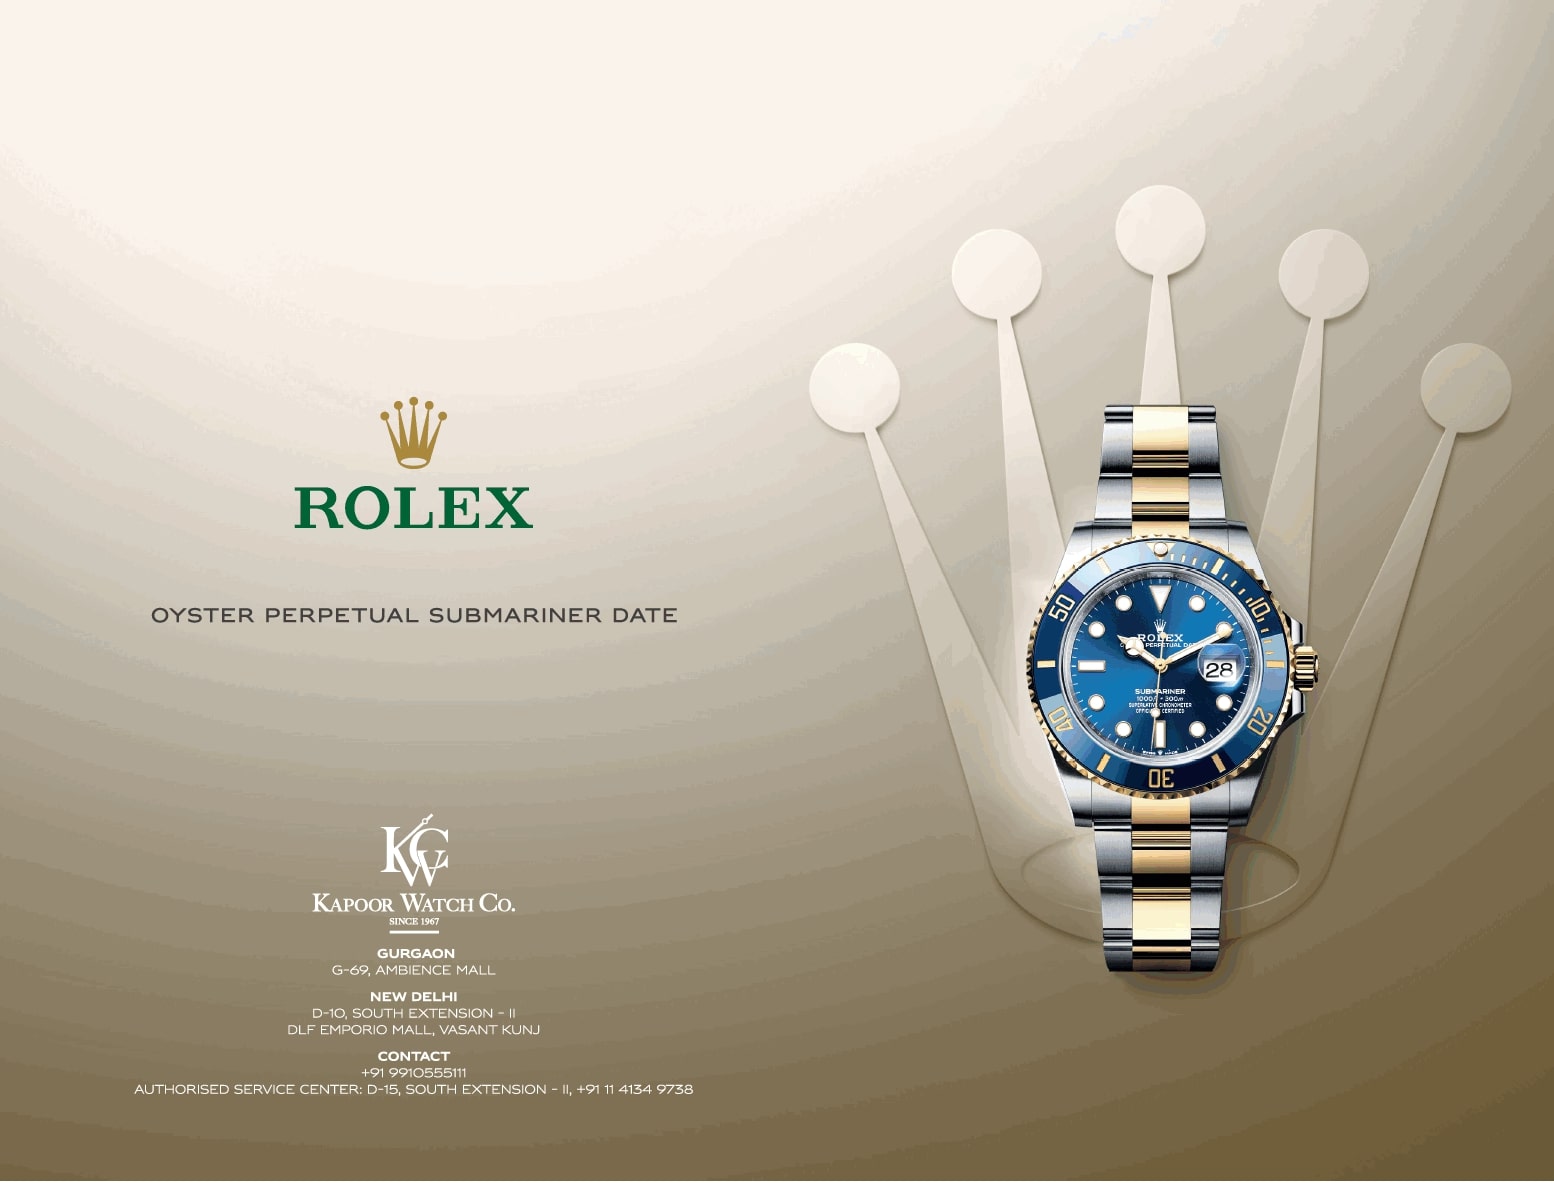 rolex-oyster-perpetual-submariner-date-kapoor-watch-co-ad-times-of-india-delhi-27-01-2021